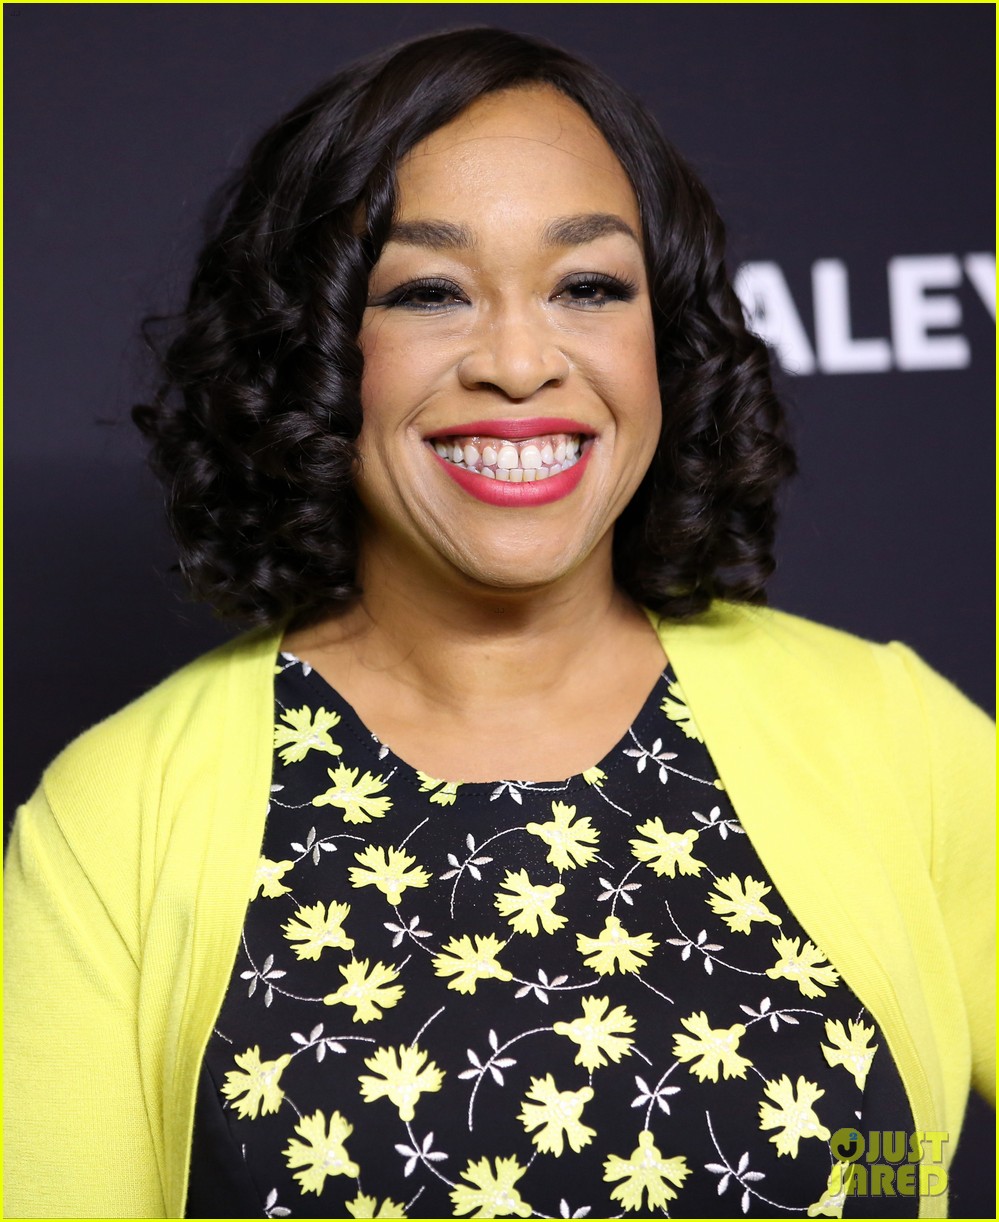 shonda rhimes on scandal abortion a woman made a choice about her body 17